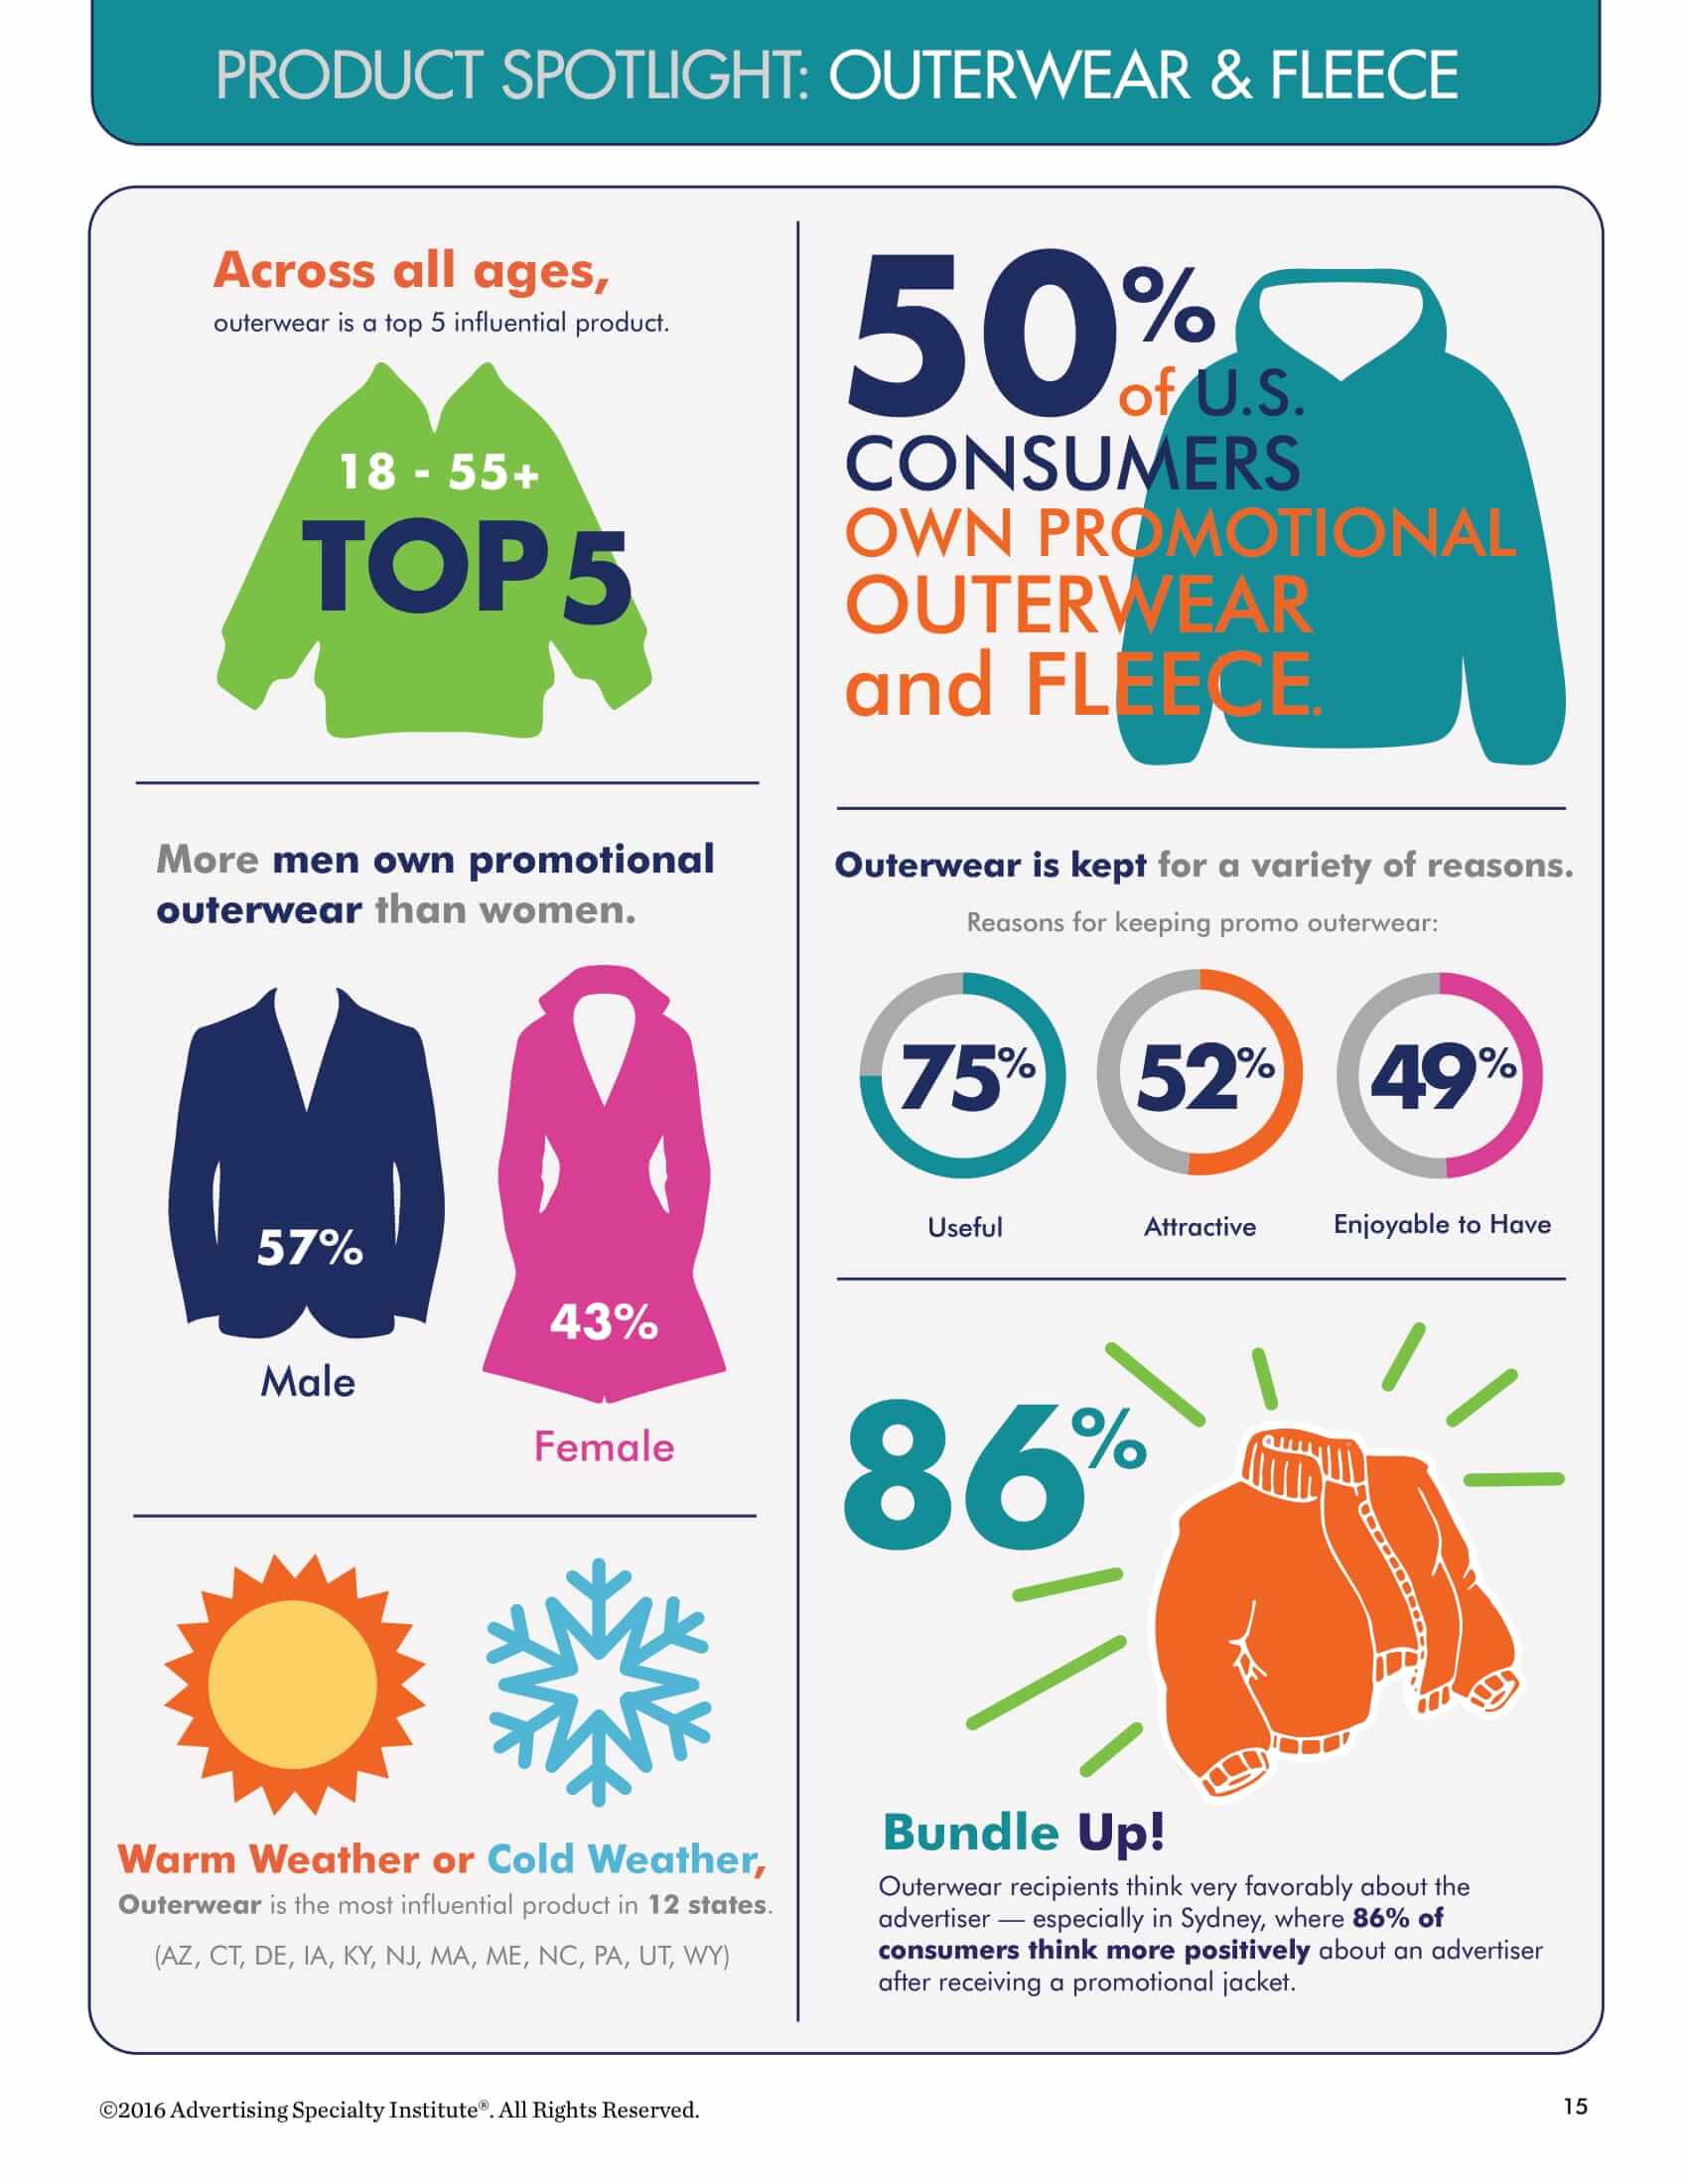 US Consumer Preference: Promotional Outerwear & Fleece Corporate Gifts Percentage